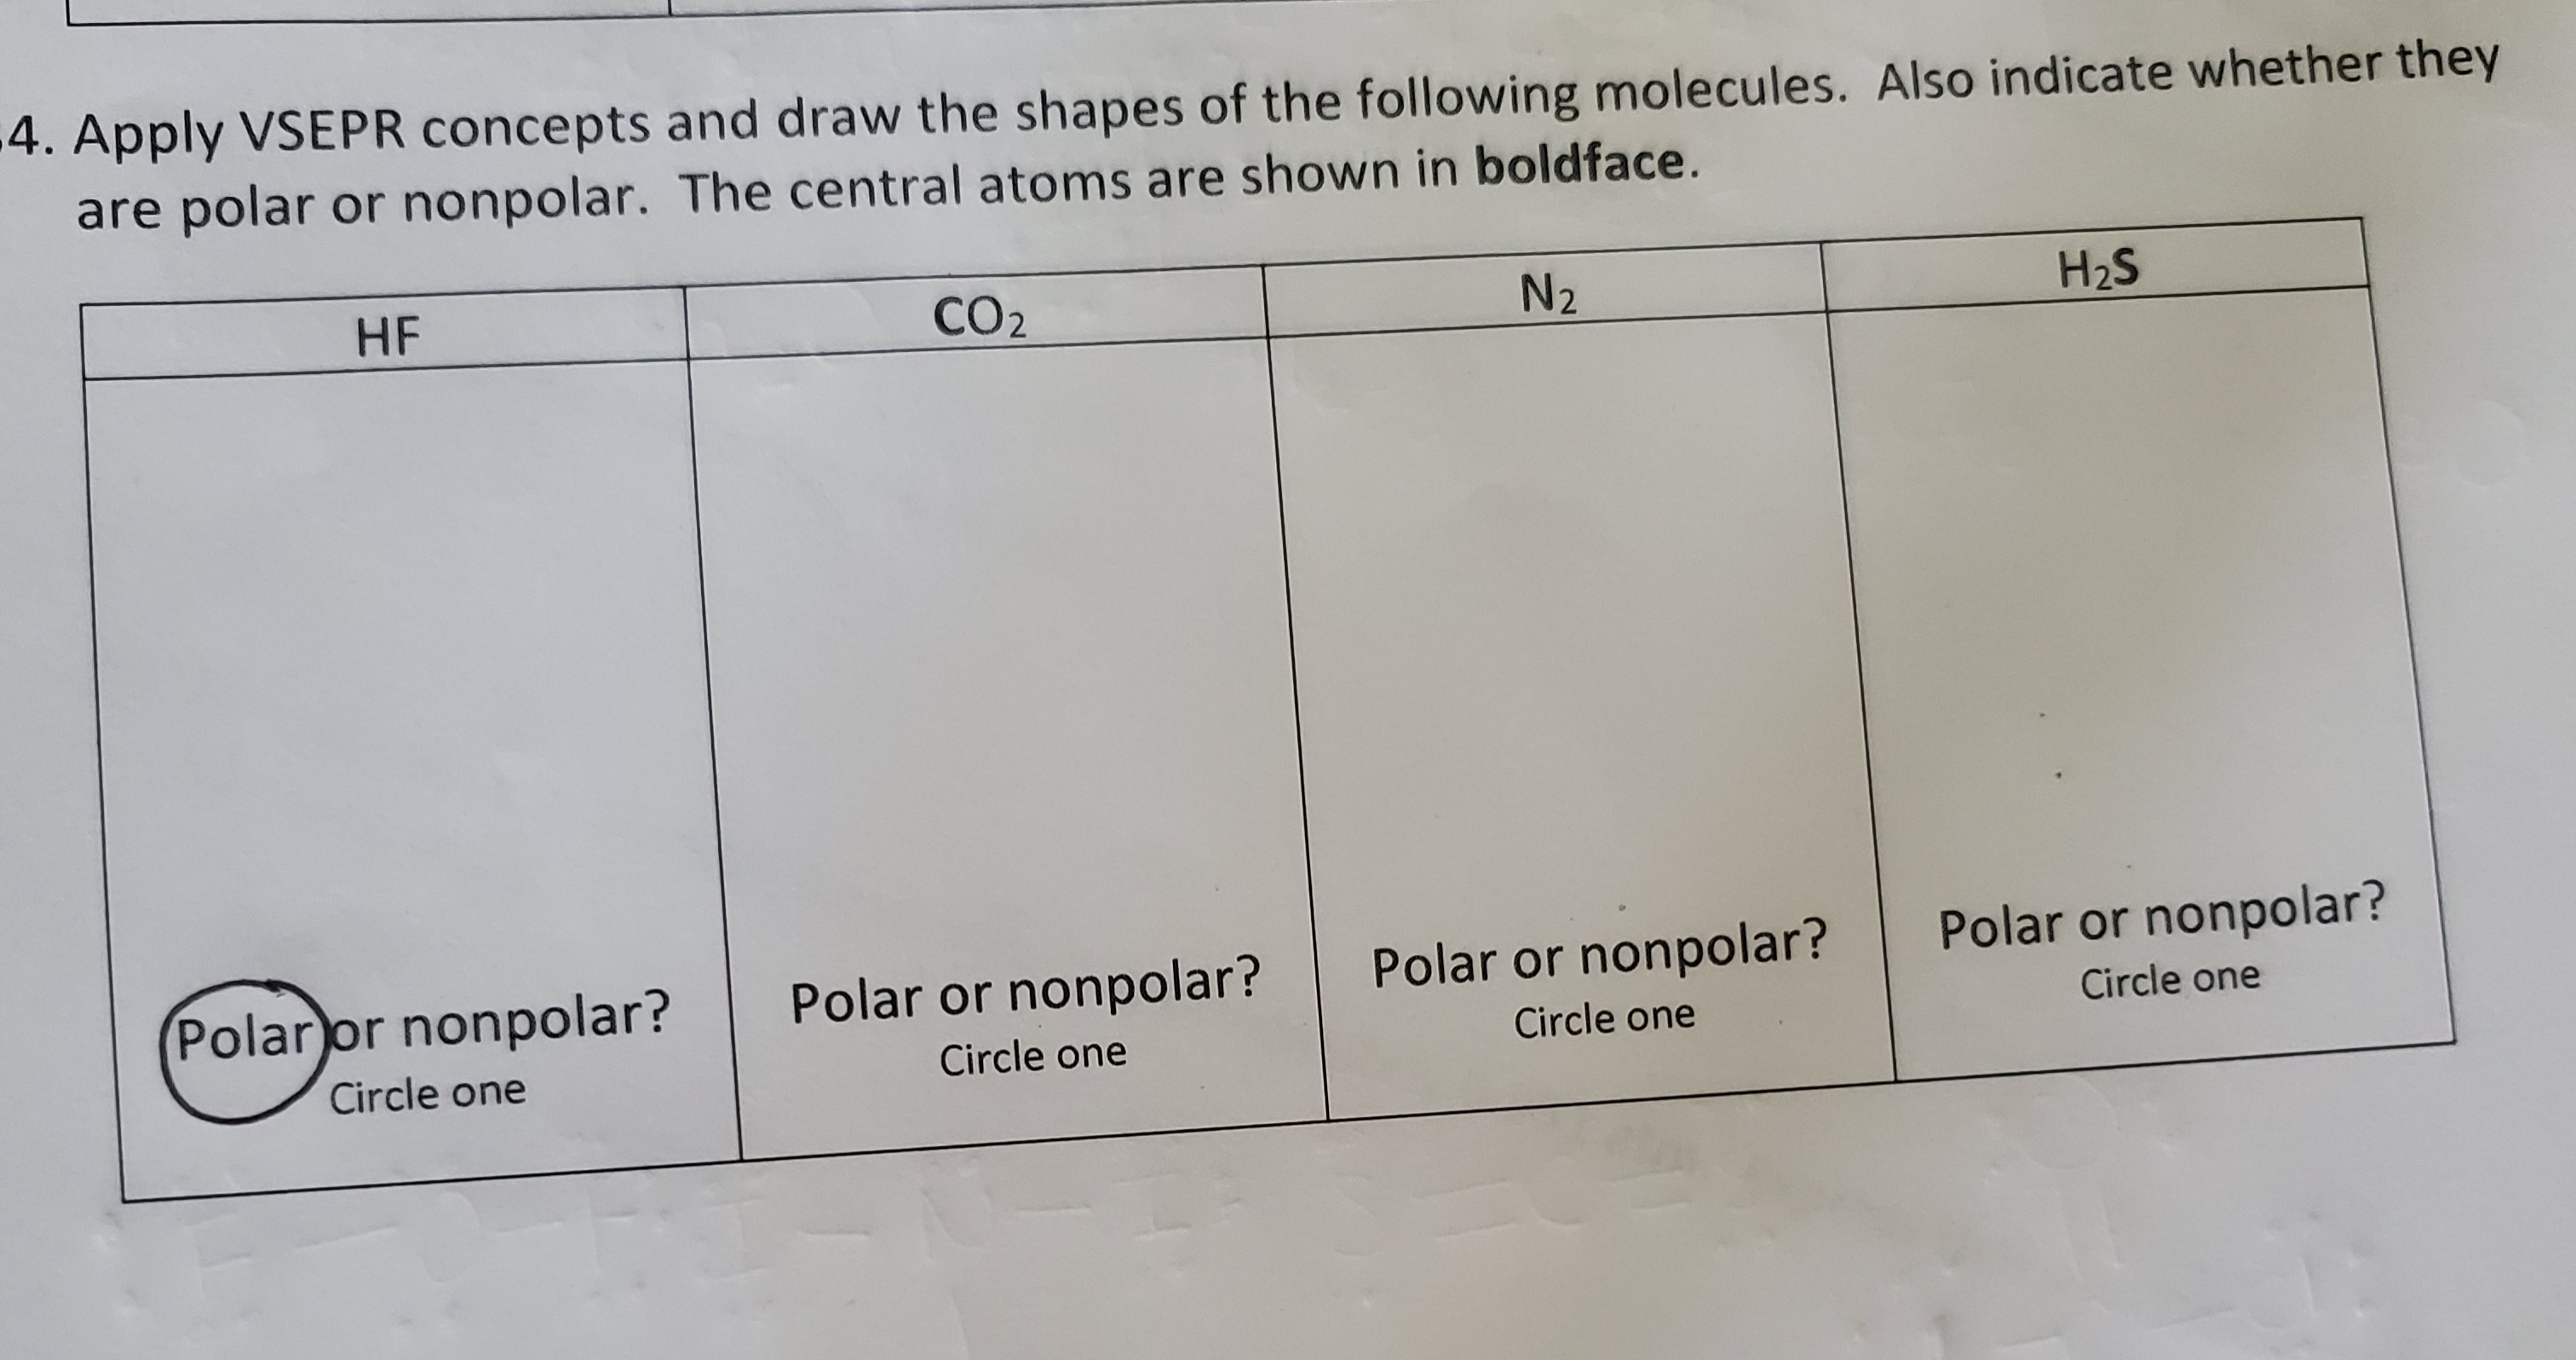 Apply VSEPR concepts and draw the shapes of the following molecules. Also indicate whether they
are polar or nonpolar. The central atoms are shown in boldface.
HF
CO2
N2
H2S
Polar or nonpolar?
Polar or nonpolar?
Polar or nonpolar?
Polar or nonpolar?
Circle one
Circle one
Circle one
Circle one
